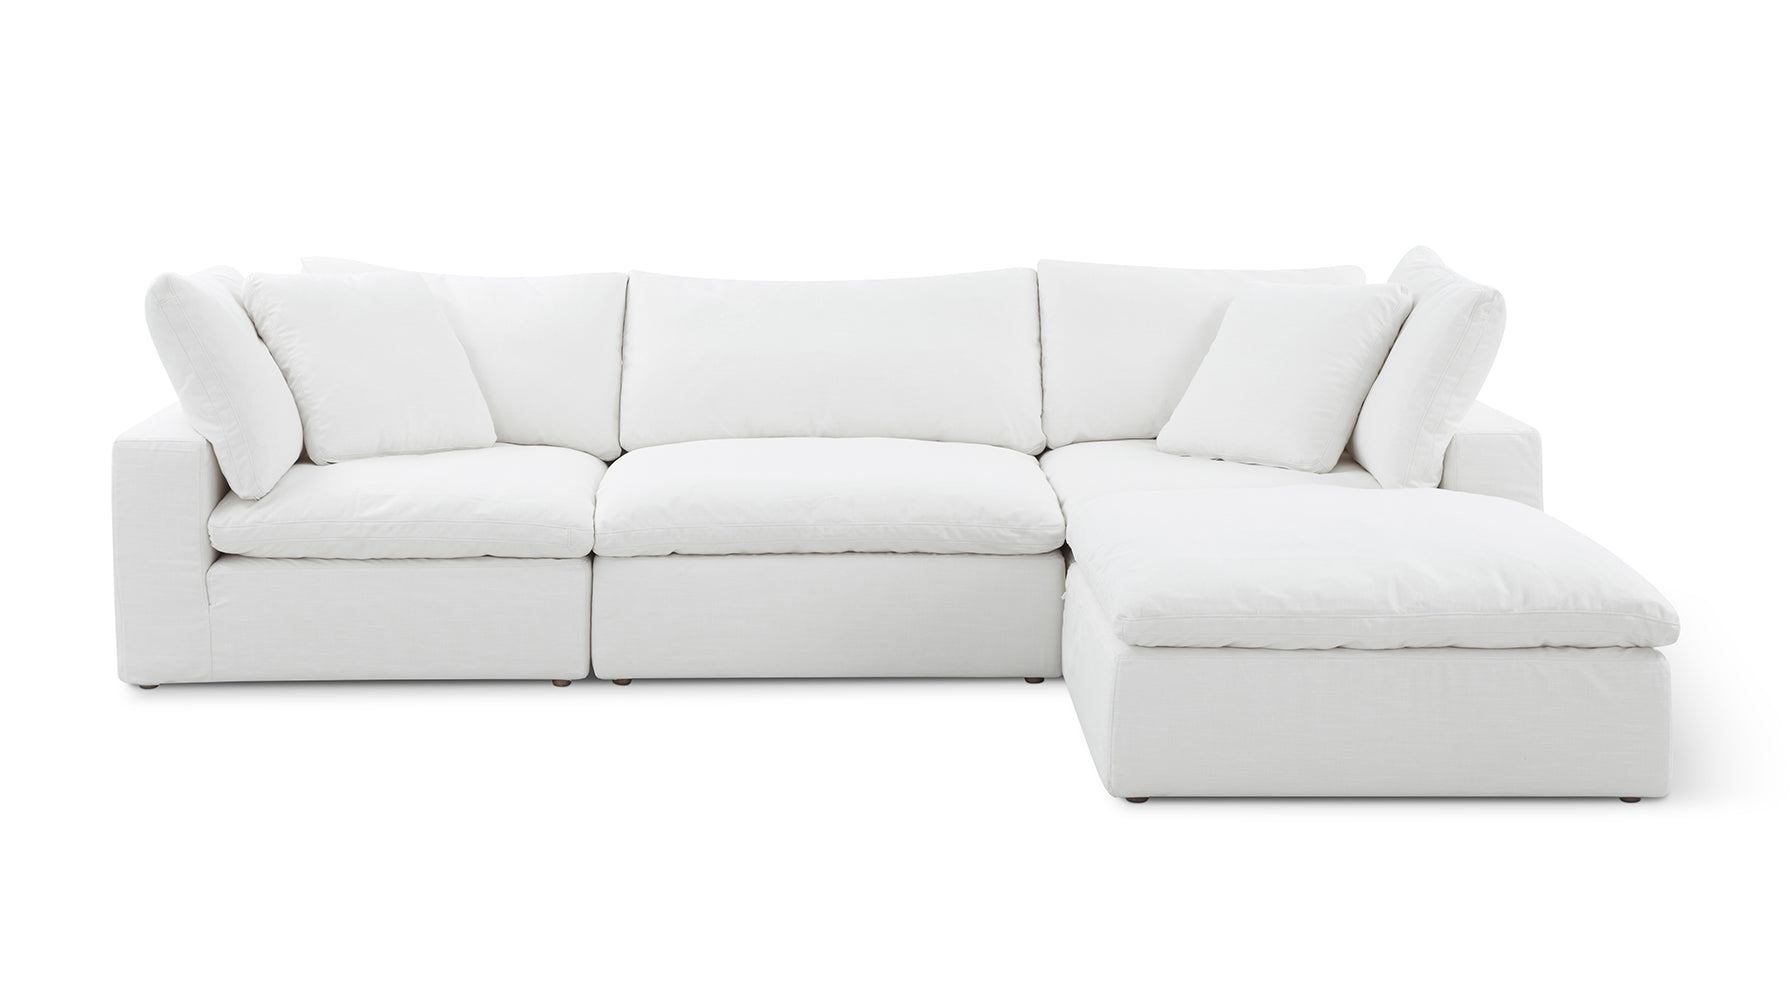 Movie Night™ 4-Piece Modular Sectional, Large, Brie - Image 1